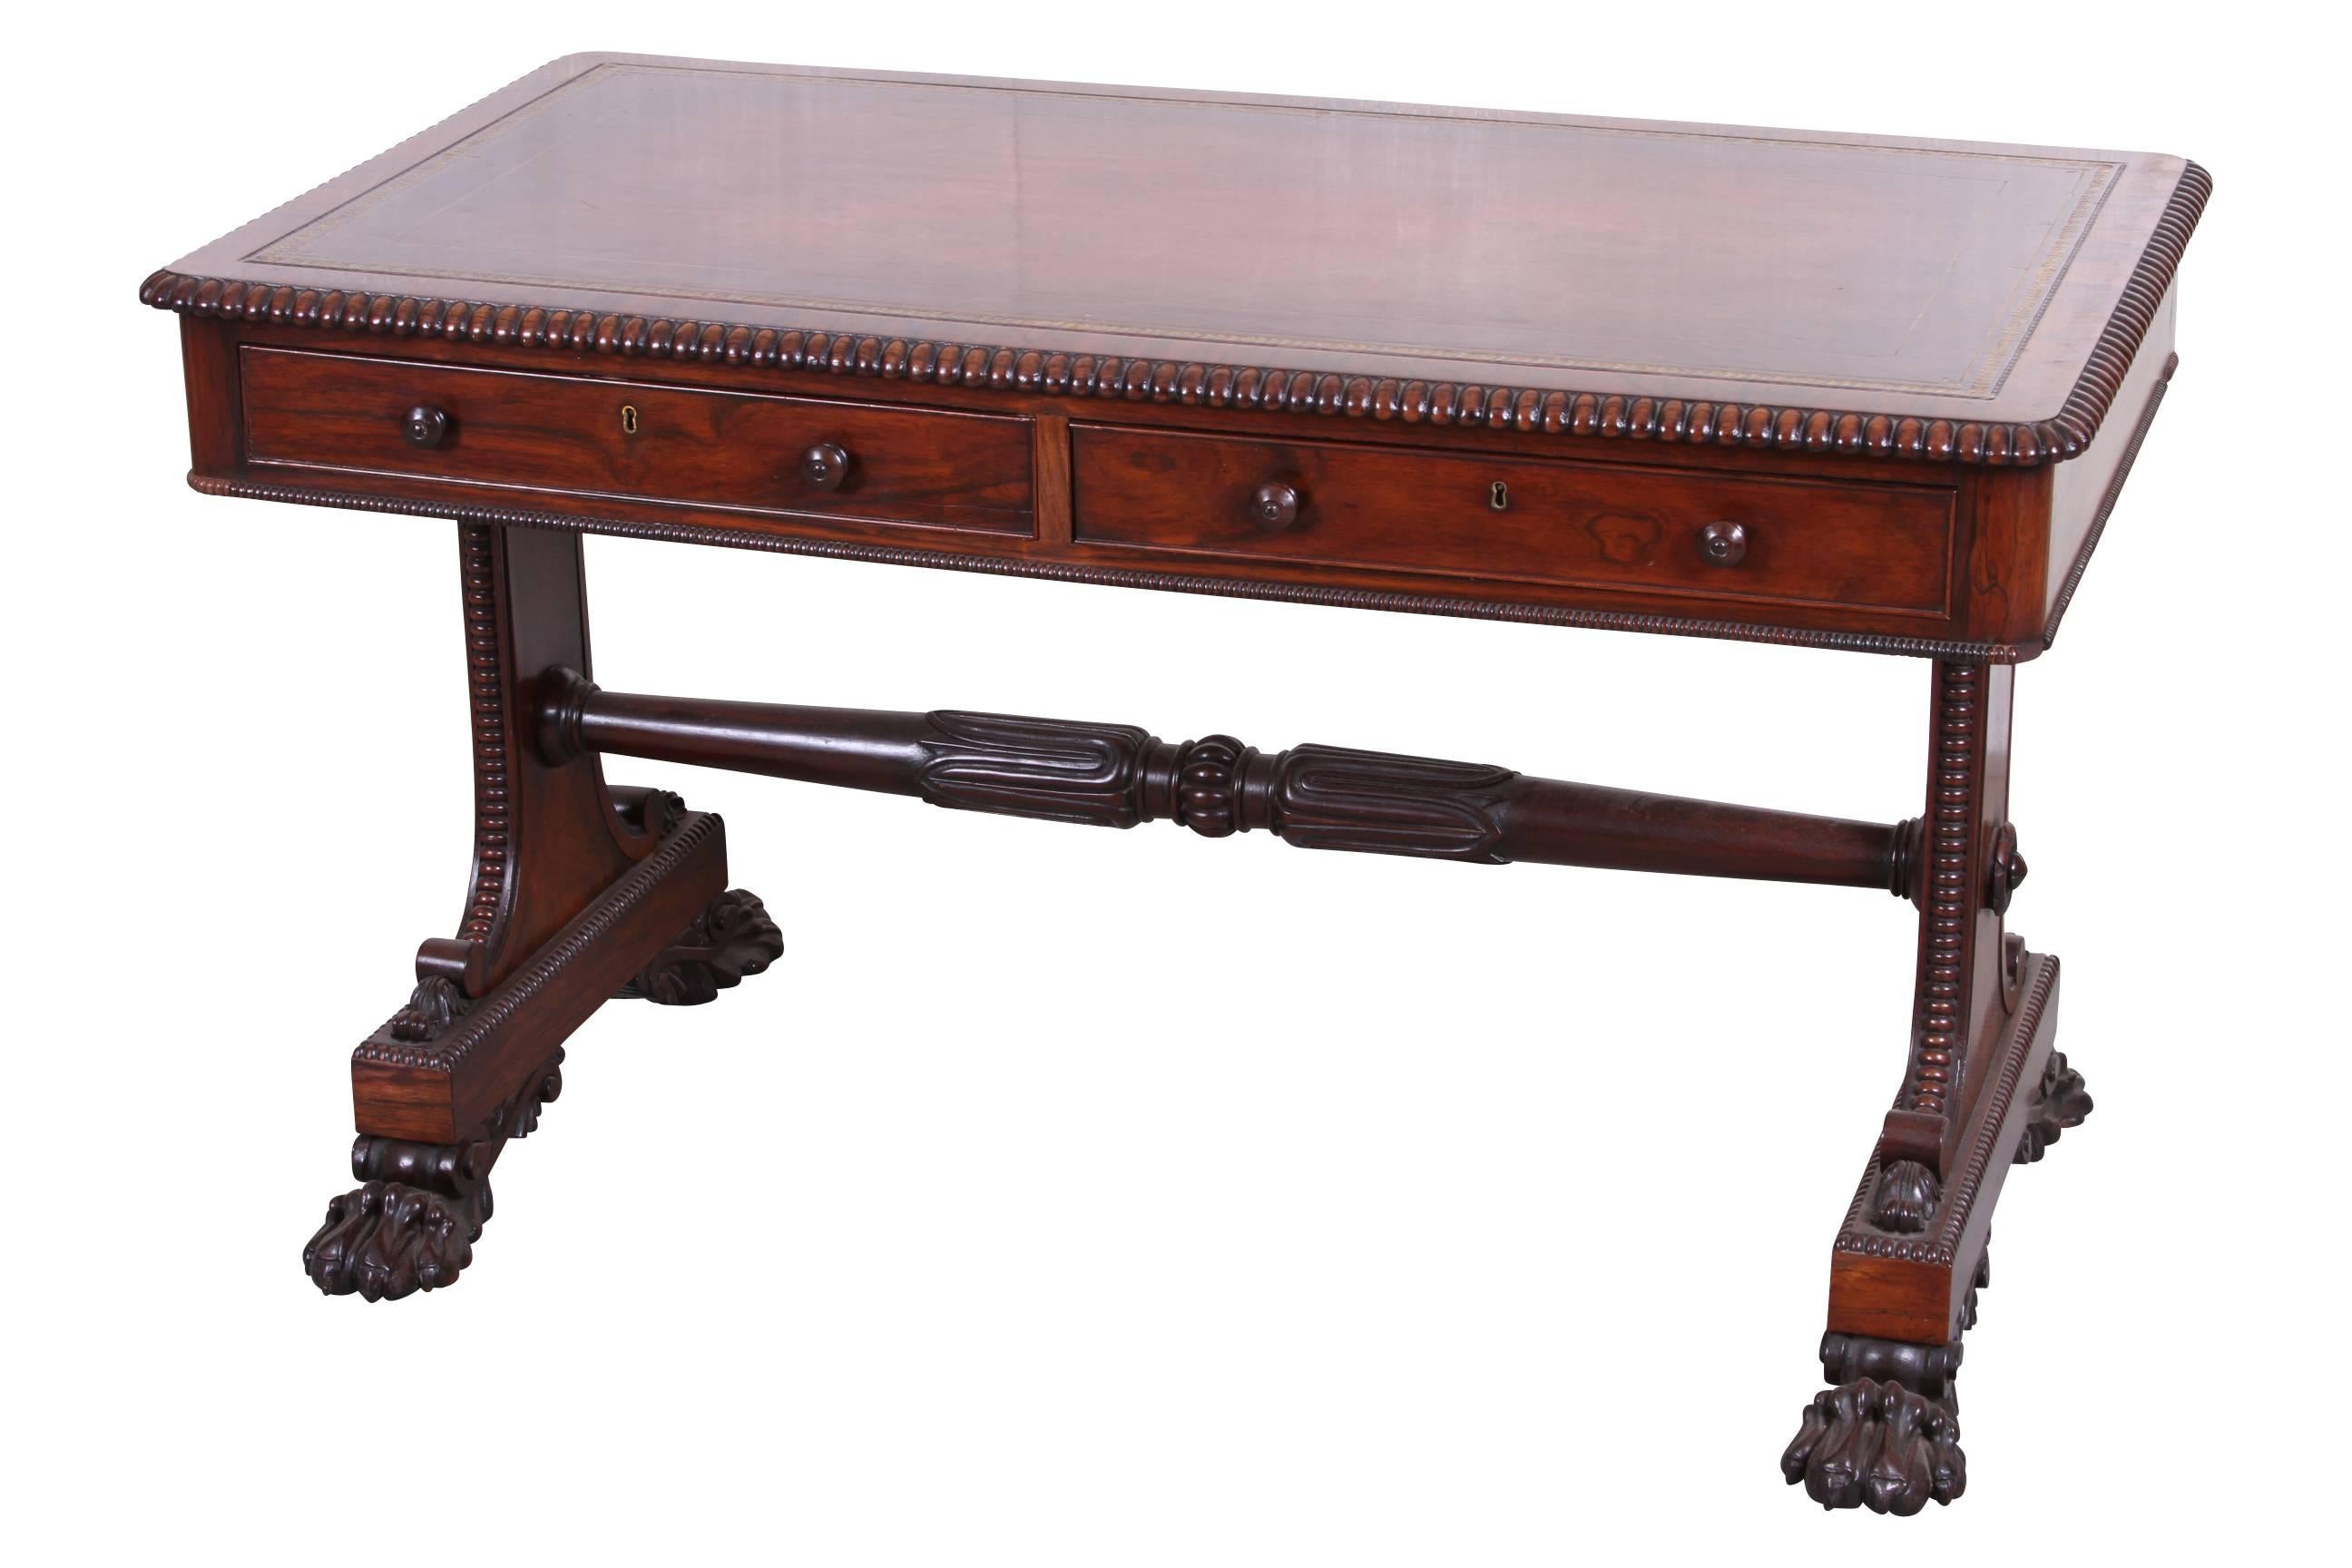 Hand-Crafted Late English Regency Rosewood Writing Table